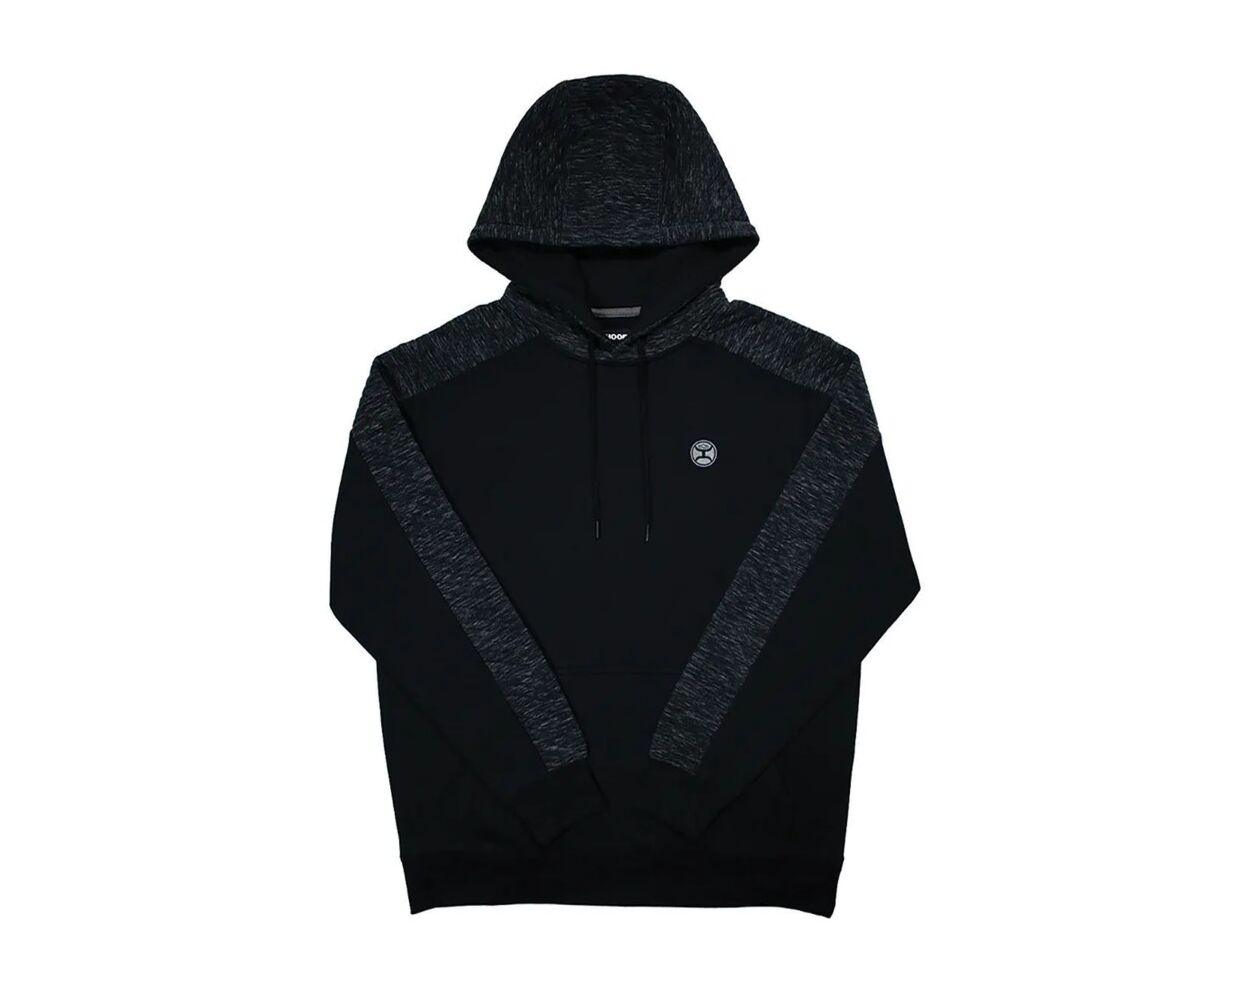 CANYON BLK HOODY GREY TAPING - Purpose-Built / Home of the Trades